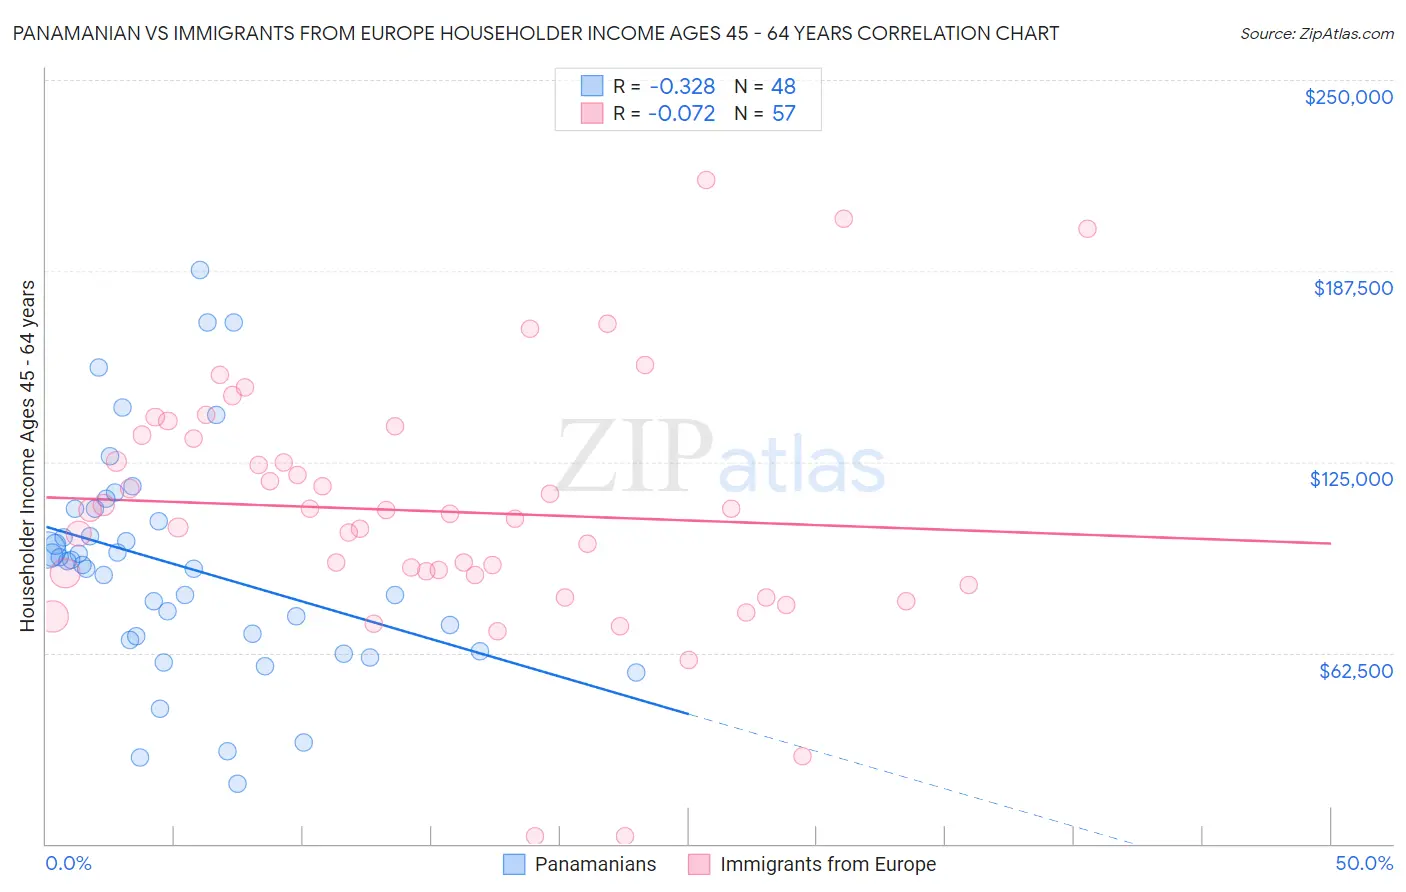 Panamanian vs Immigrants from Europe Householder Income Ages 45 - 64 years